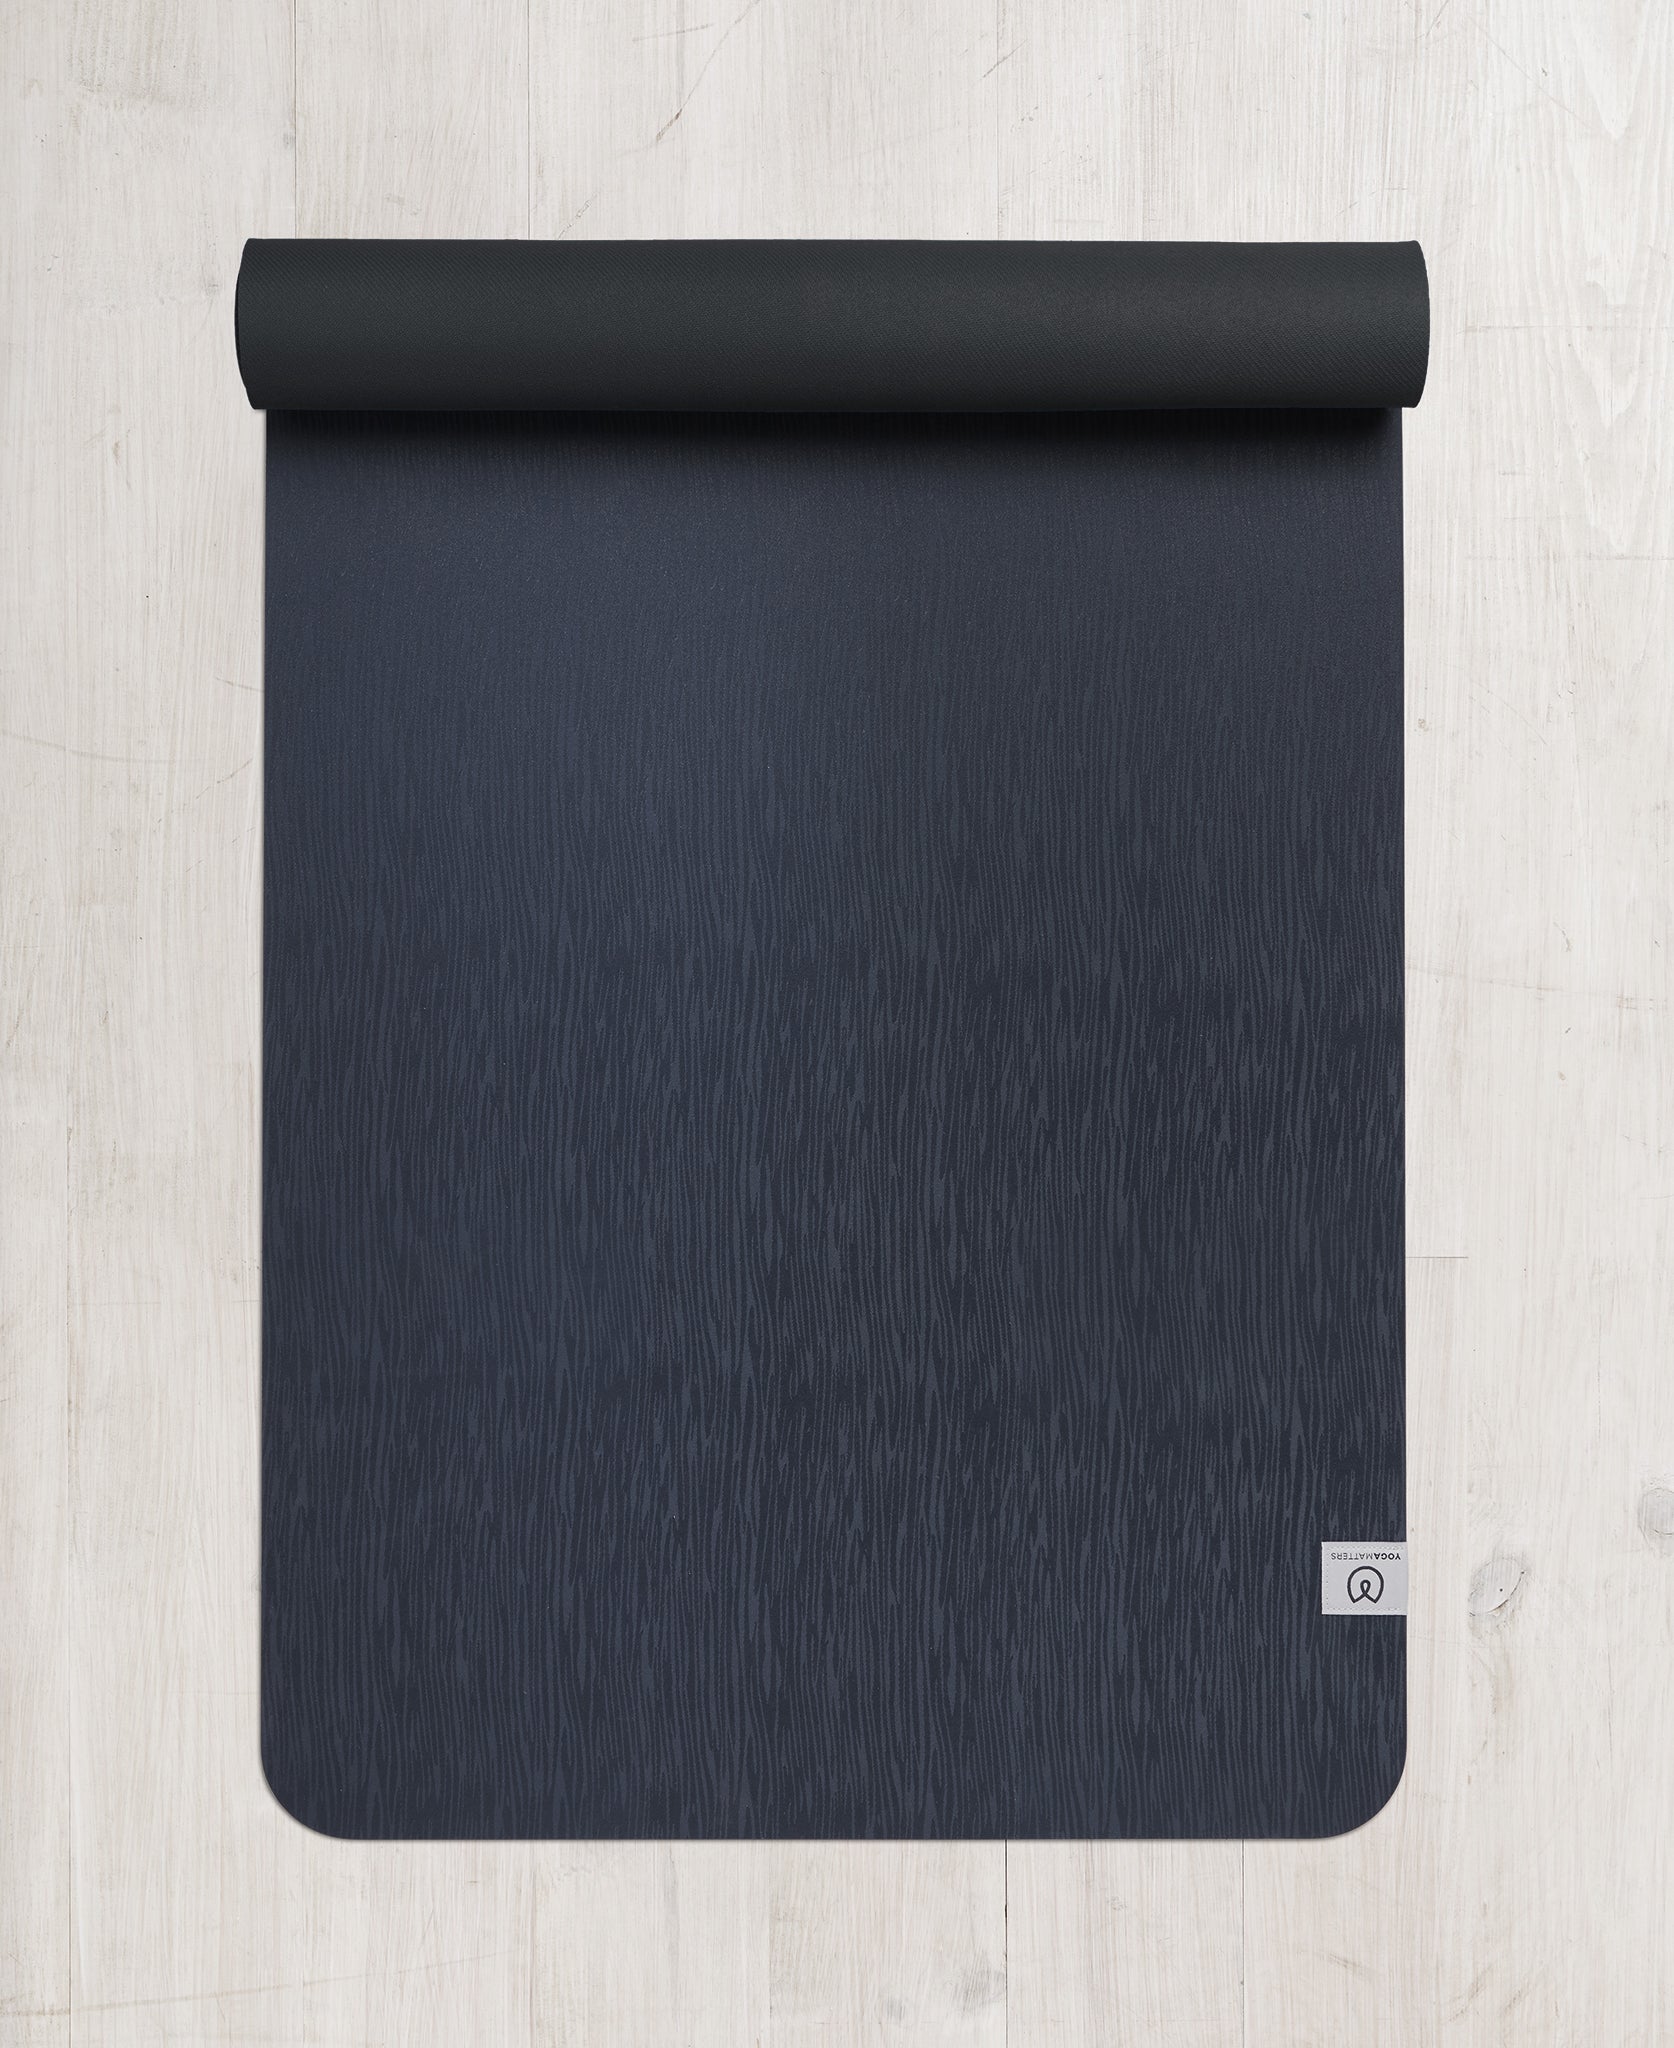 Dark navy blue premium yoga mat with textured surface, partially rolled up at the top, top view on a wooden floor background